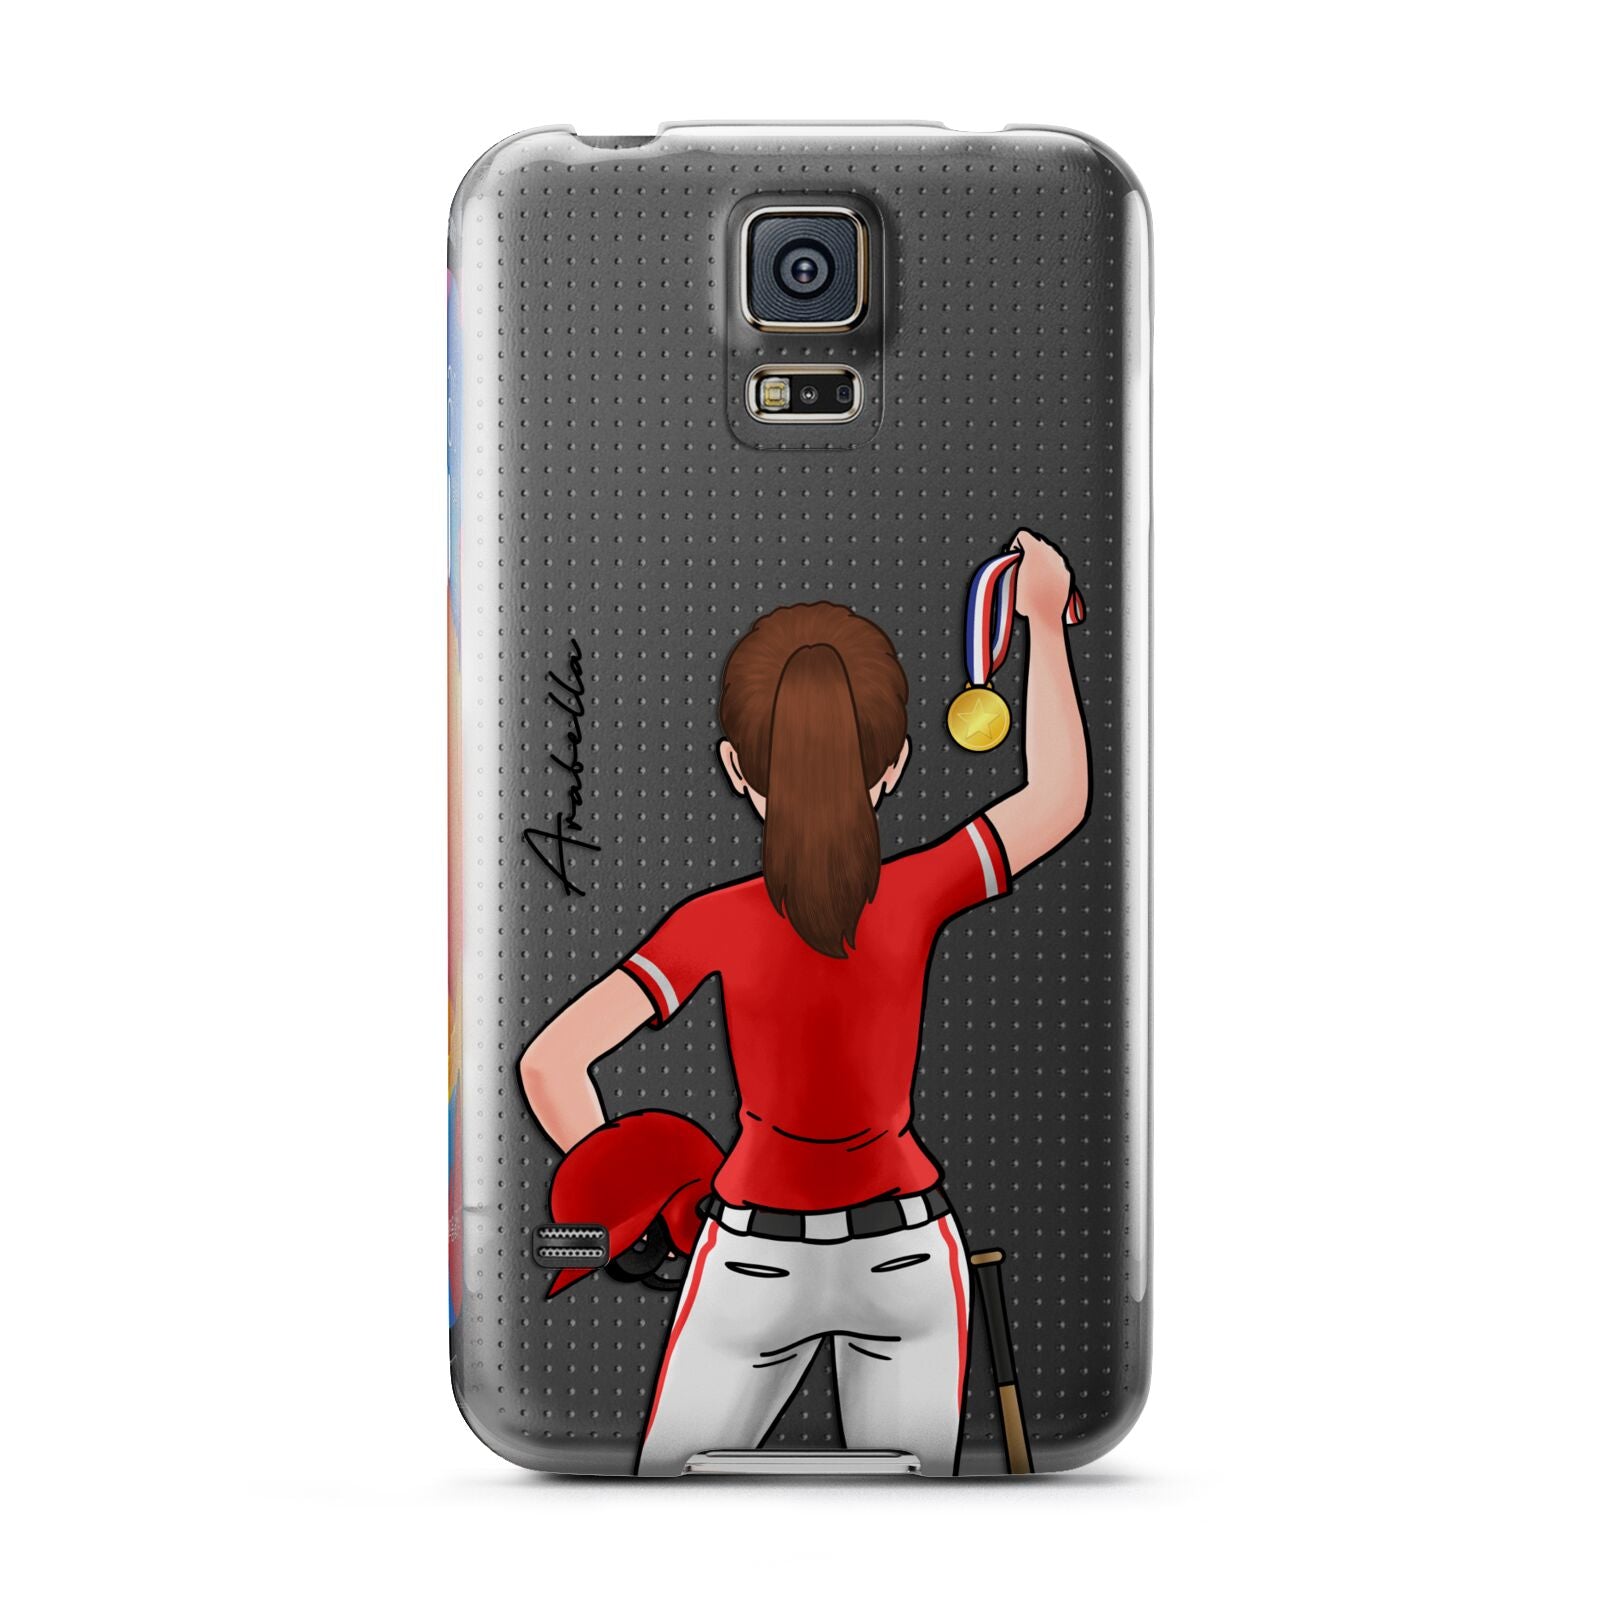 Sports Girl Personalised Samsung Galaxy S5 Case